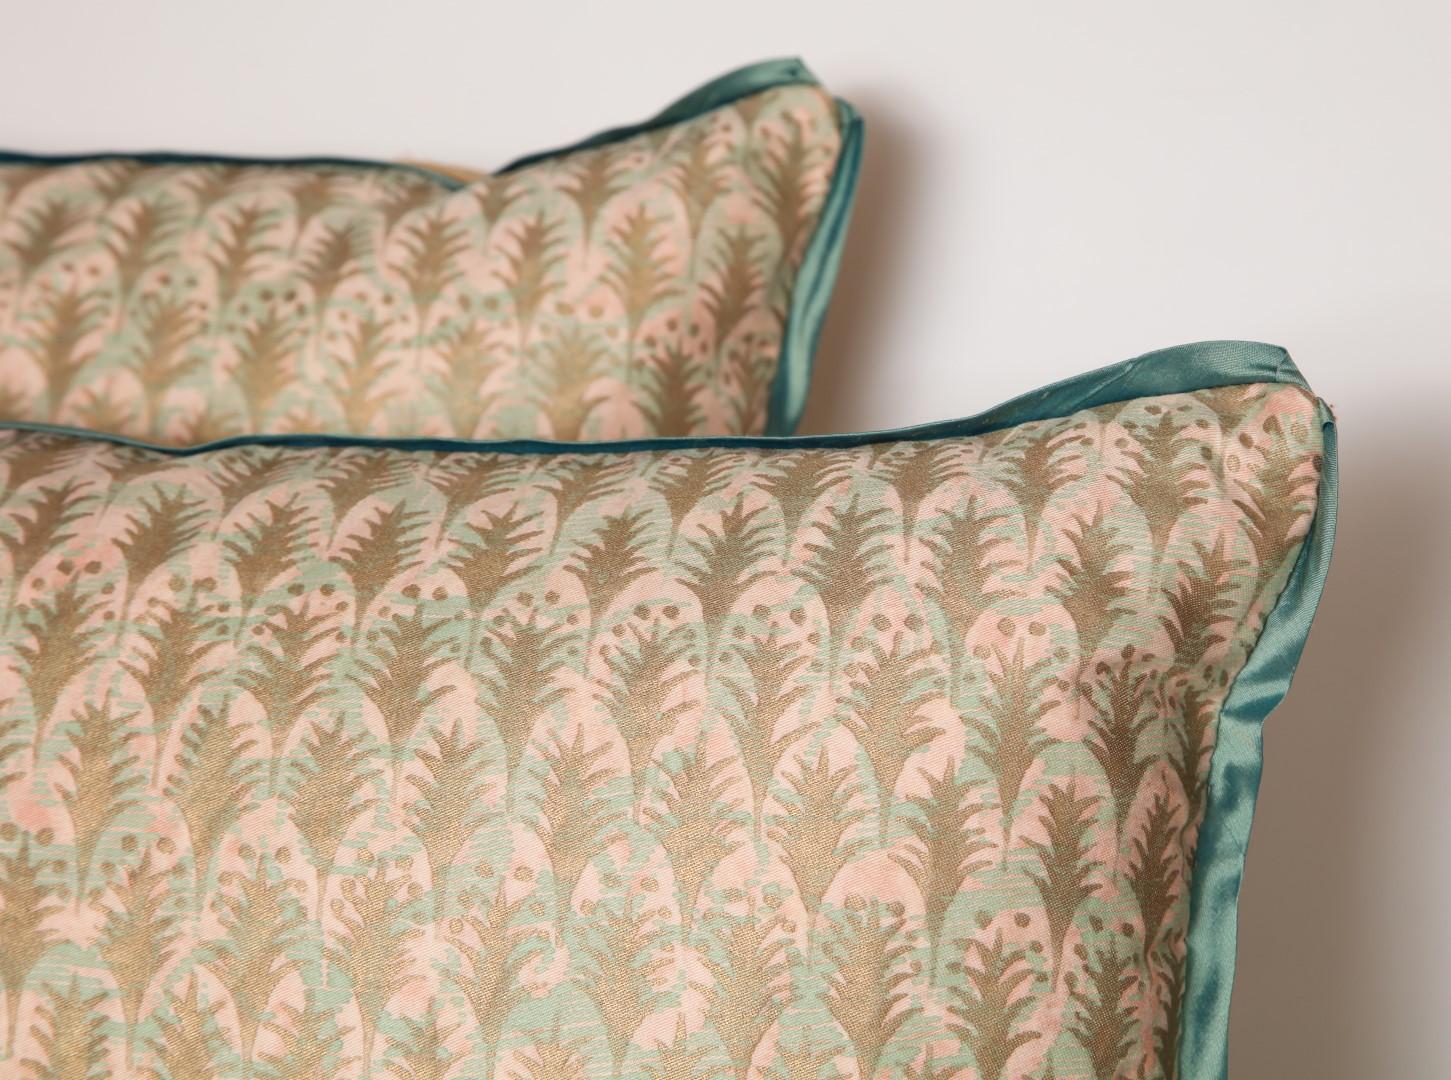 Pair of Fortuny Fabric Cushions in the Puimette Pattern, New and in Stock 1